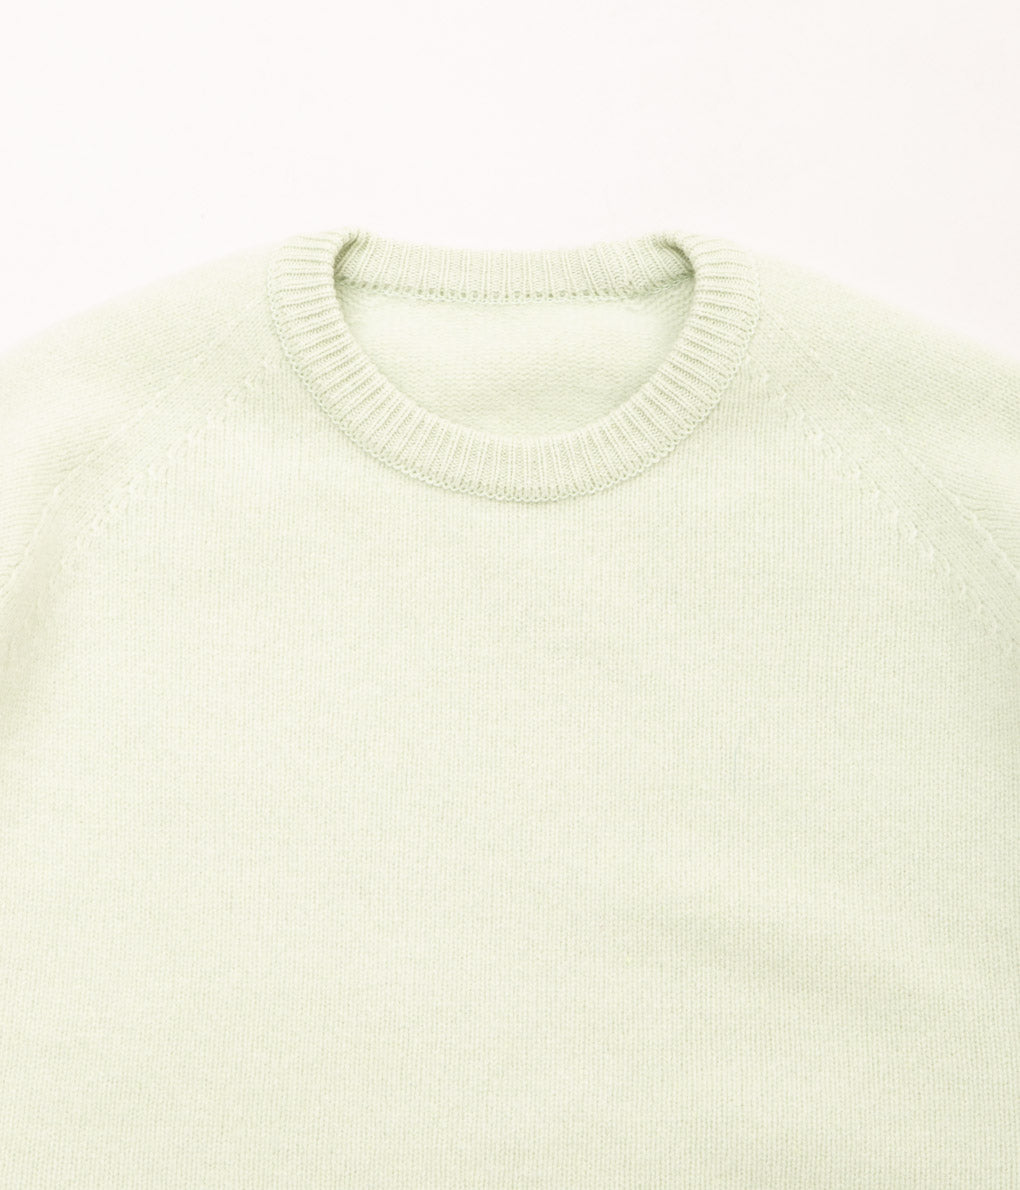 POSTELEGANT "FINE WOOL PULL-OVER KNIT" (PALE GREEN)